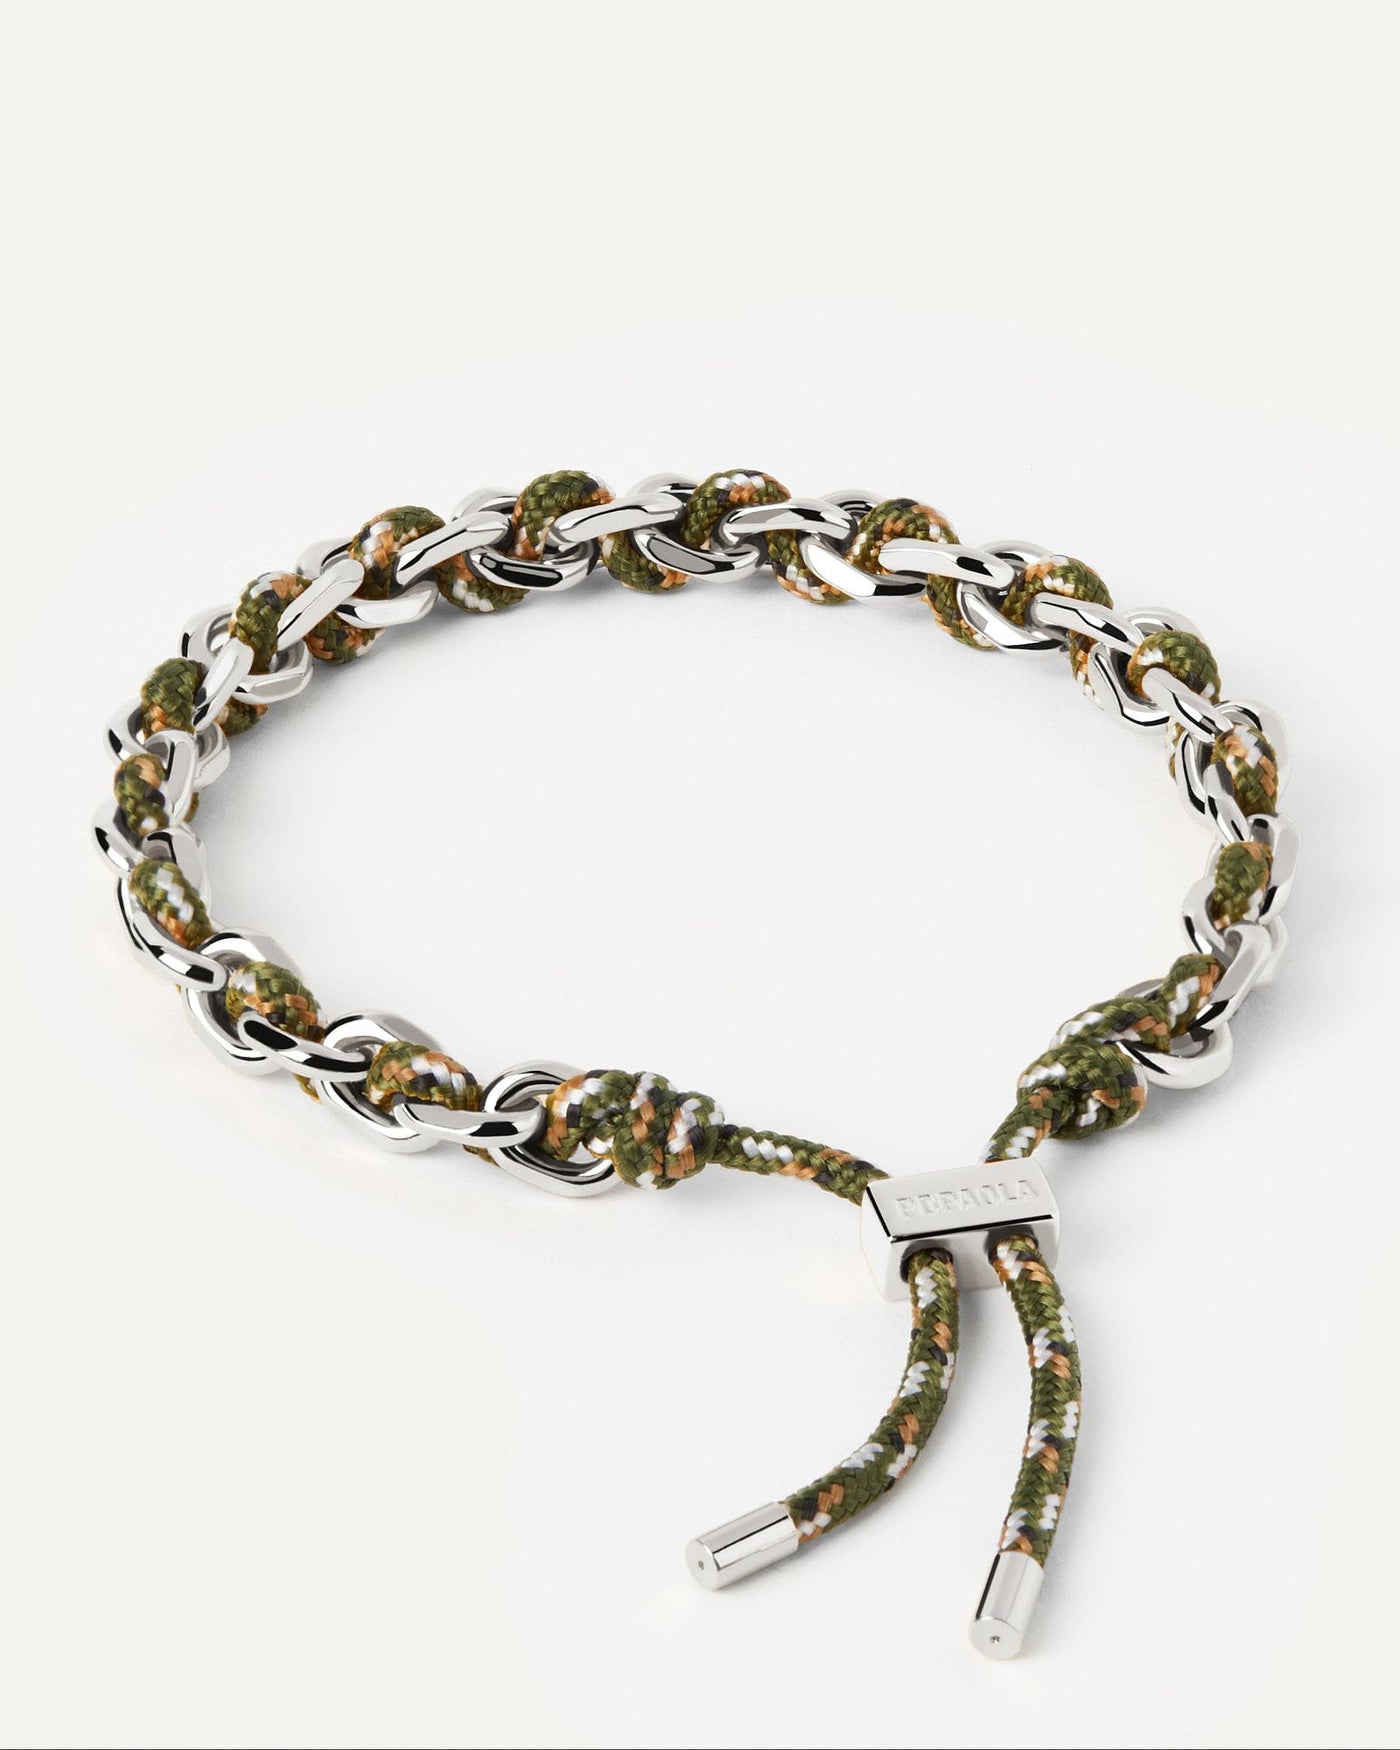 2024 Selection | Cottage Rope and Chain Silver Bracelet. Silver chain bracelet with a forest green rope adjustable sliding clasp. Get the latest arrival from PDPAOLA. Place your order safely and get this Best Seller. Free Shipping.